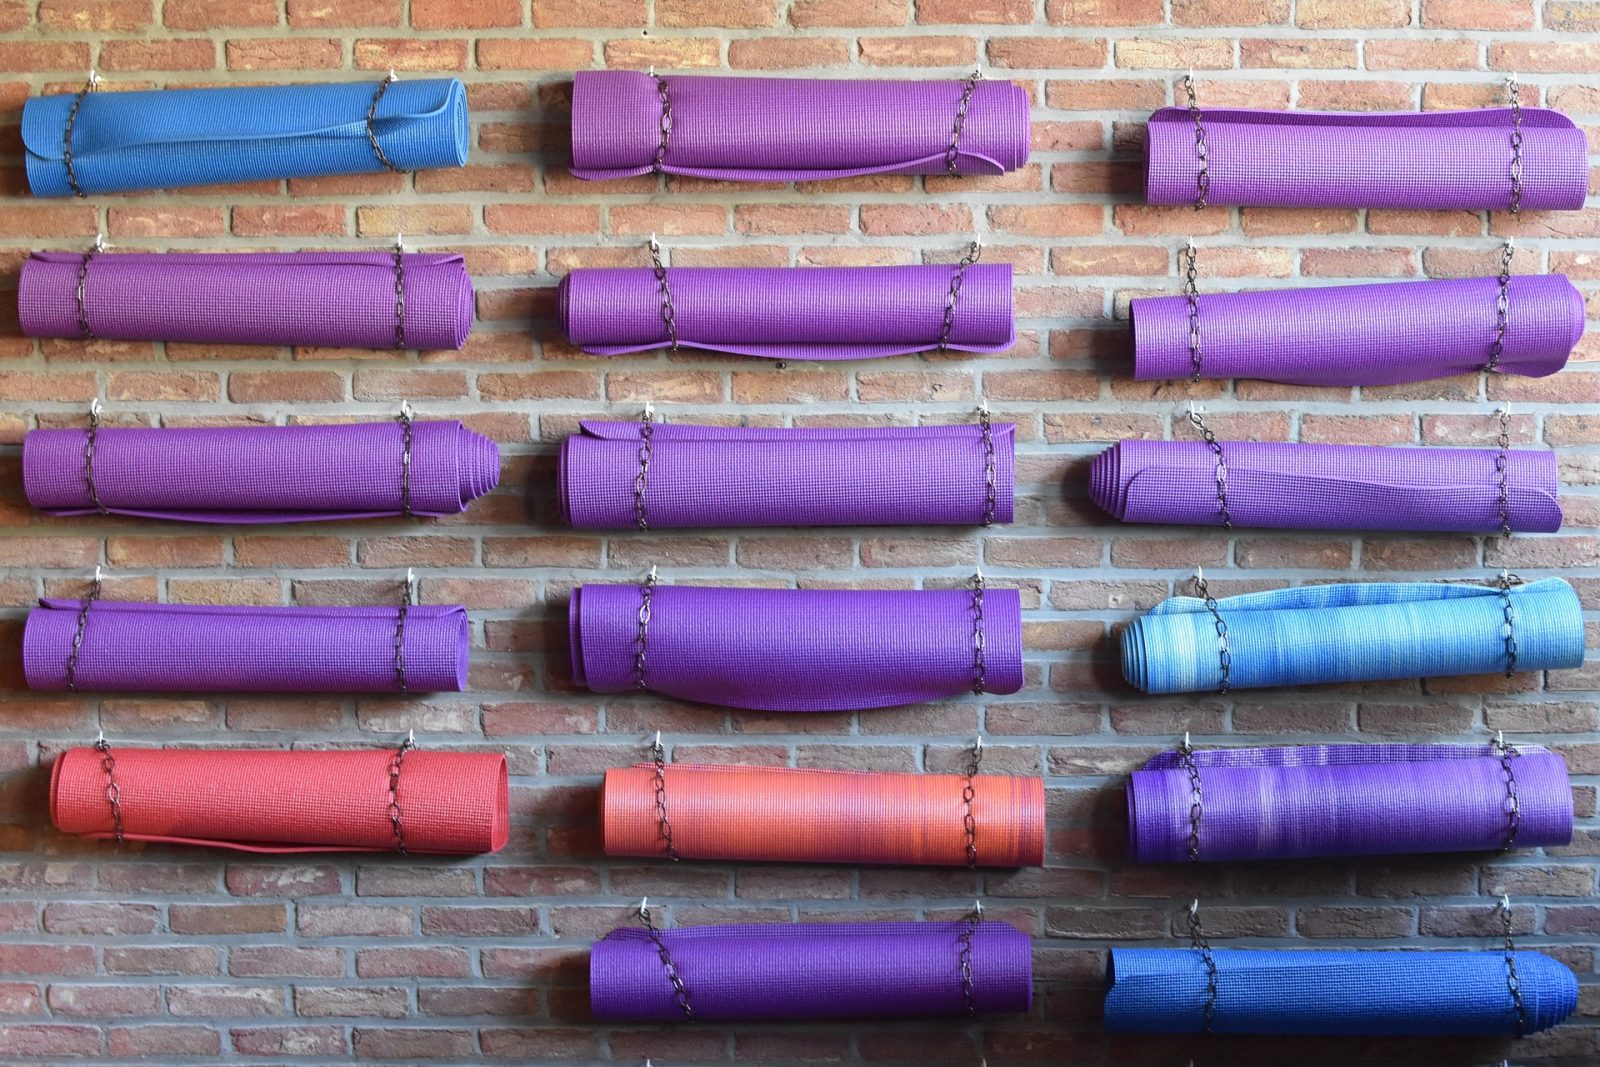 Types Of Yoga Mat Storage Ideas To Keep Your Home Clean And Tidy